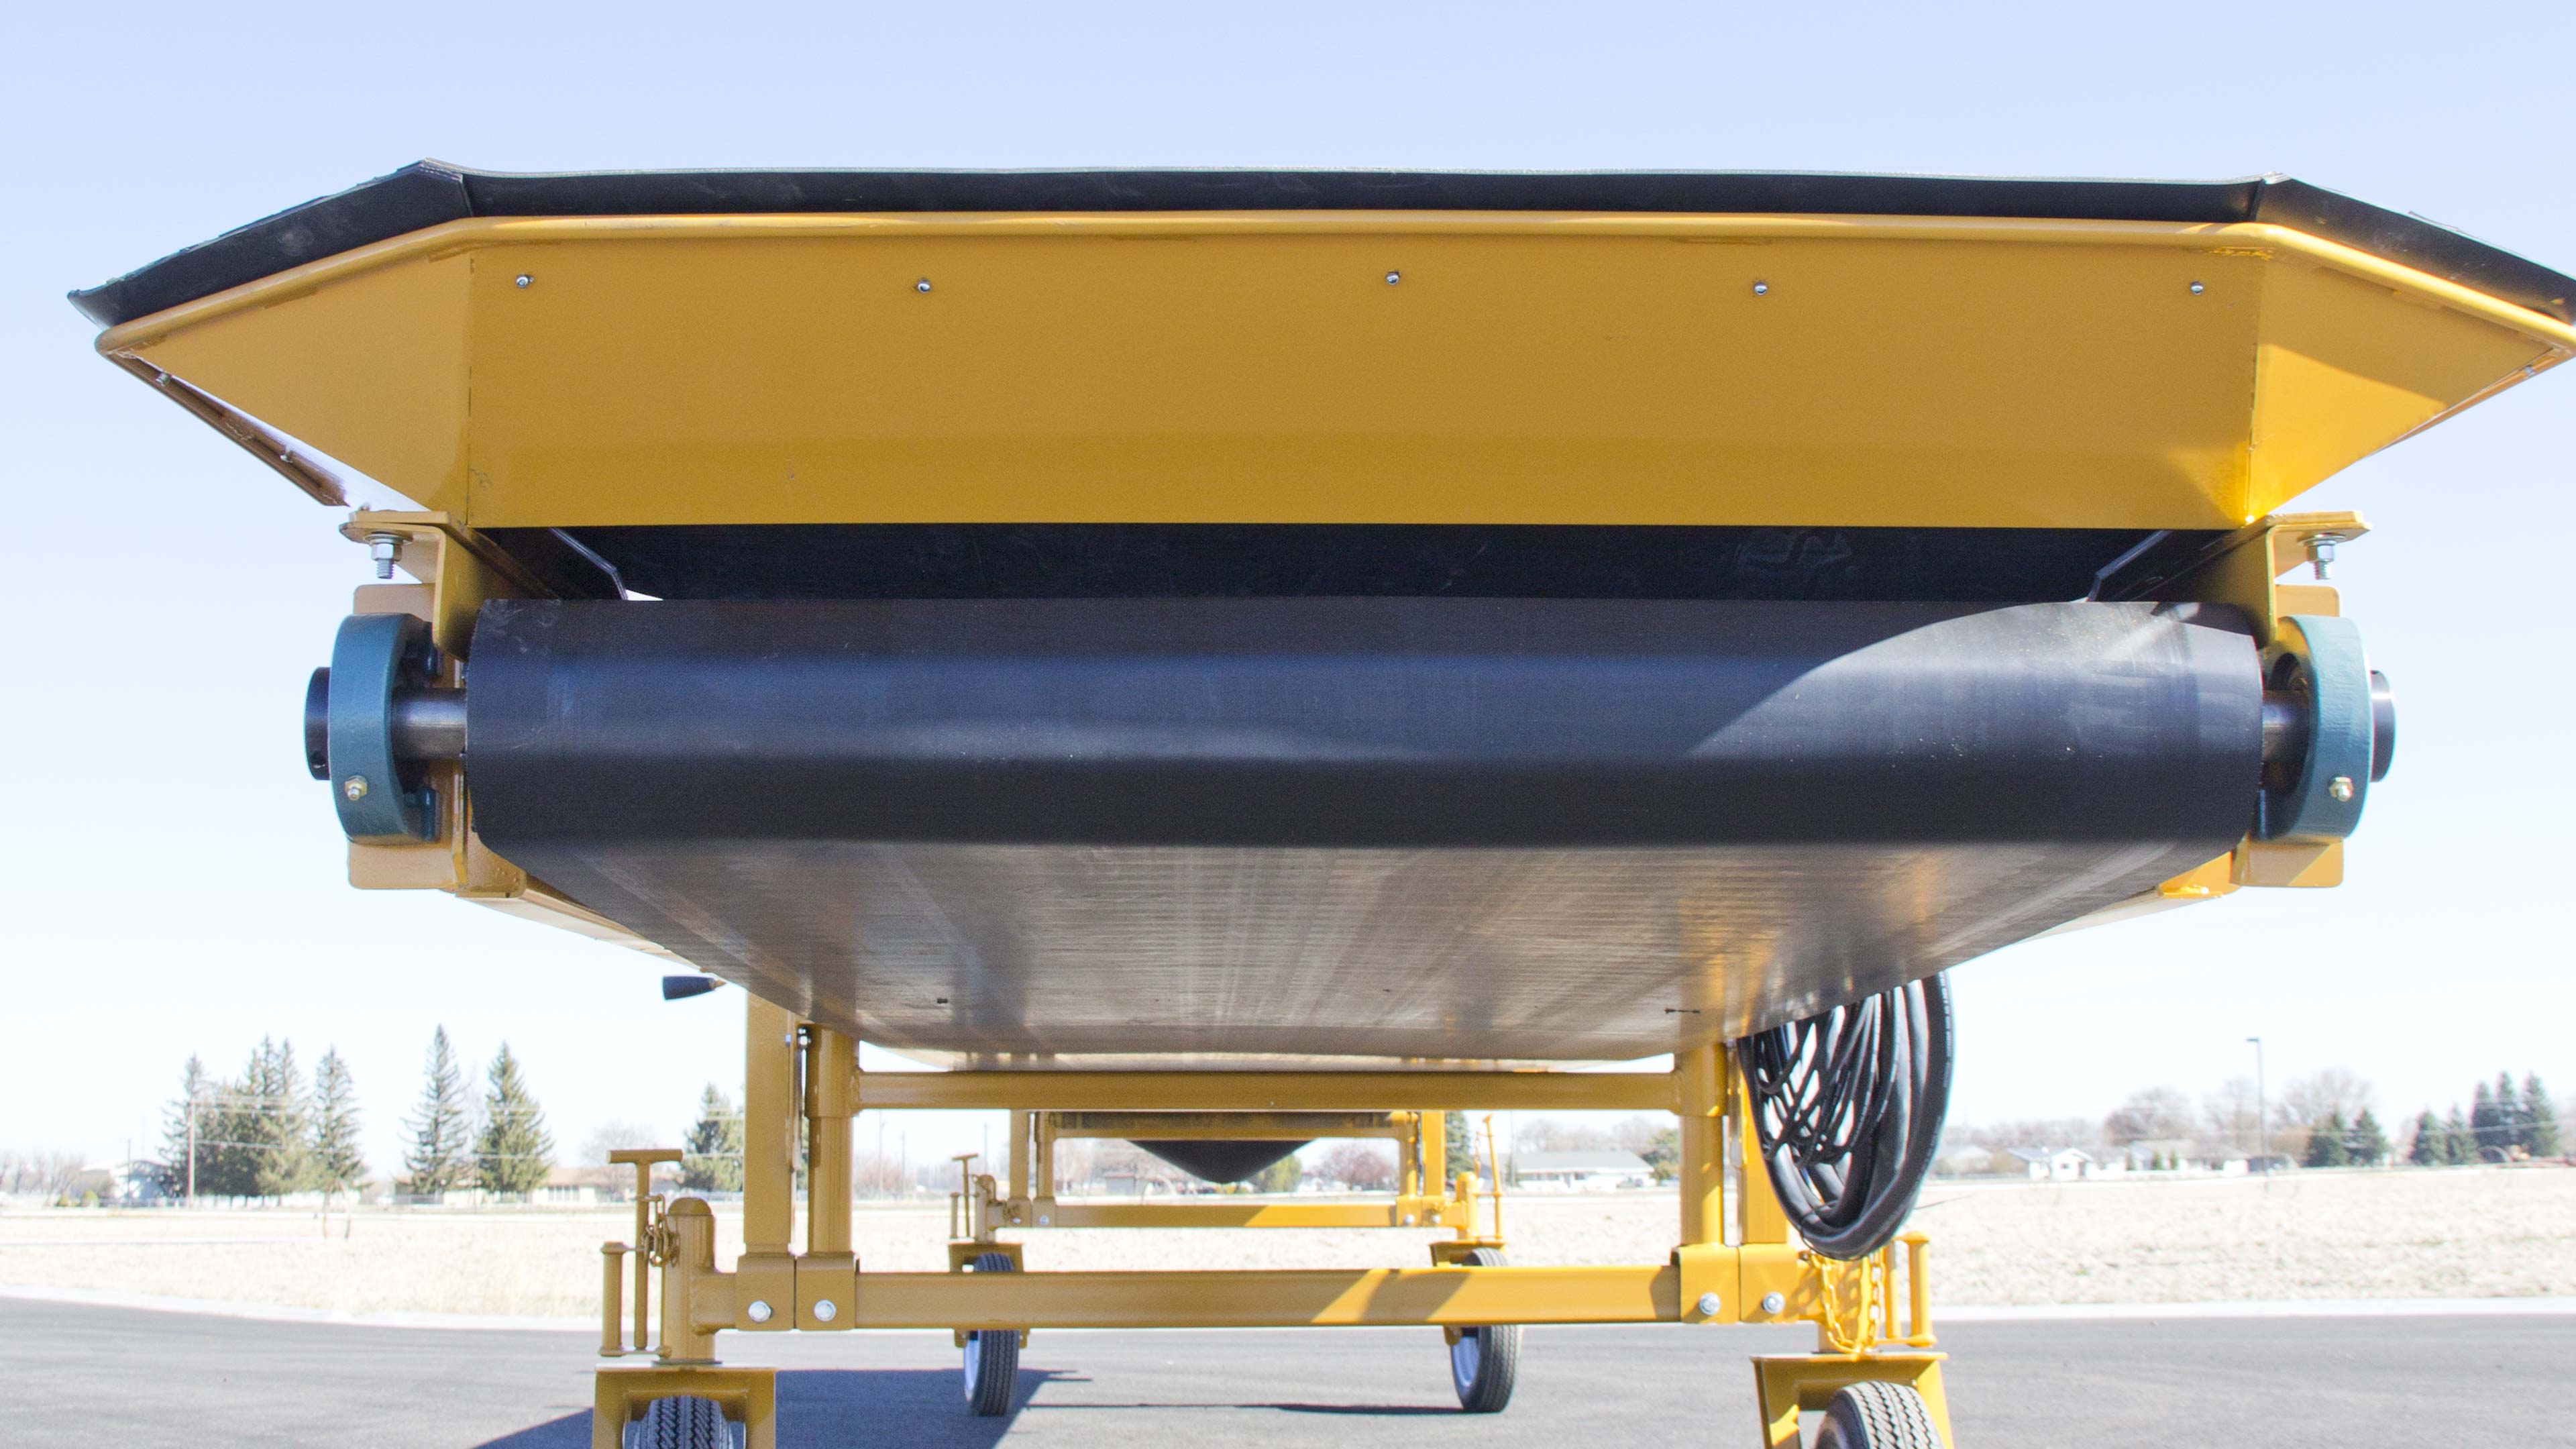 Choose how to connect your handling line together; Double L offers butt-together or hopper bowl connections on its conveyor models.